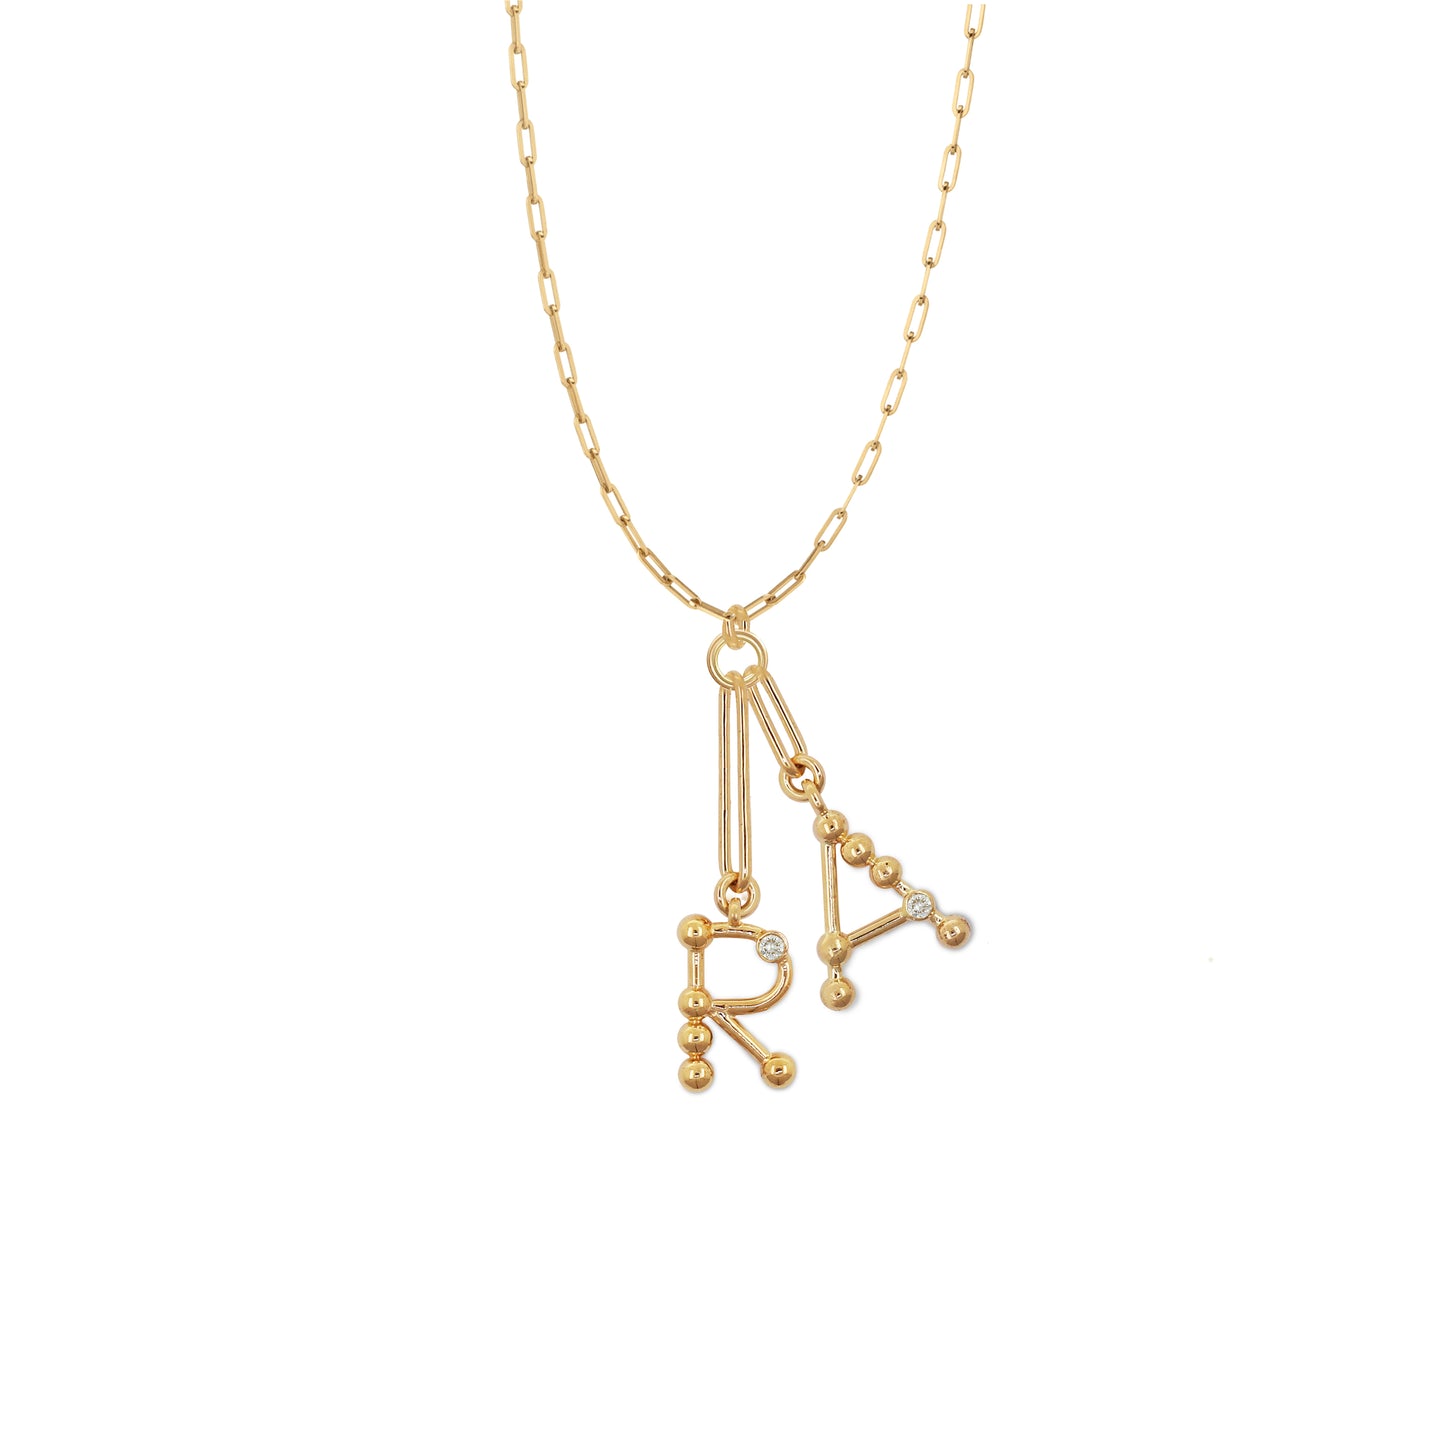 2 Letter Initial Charm Necklace